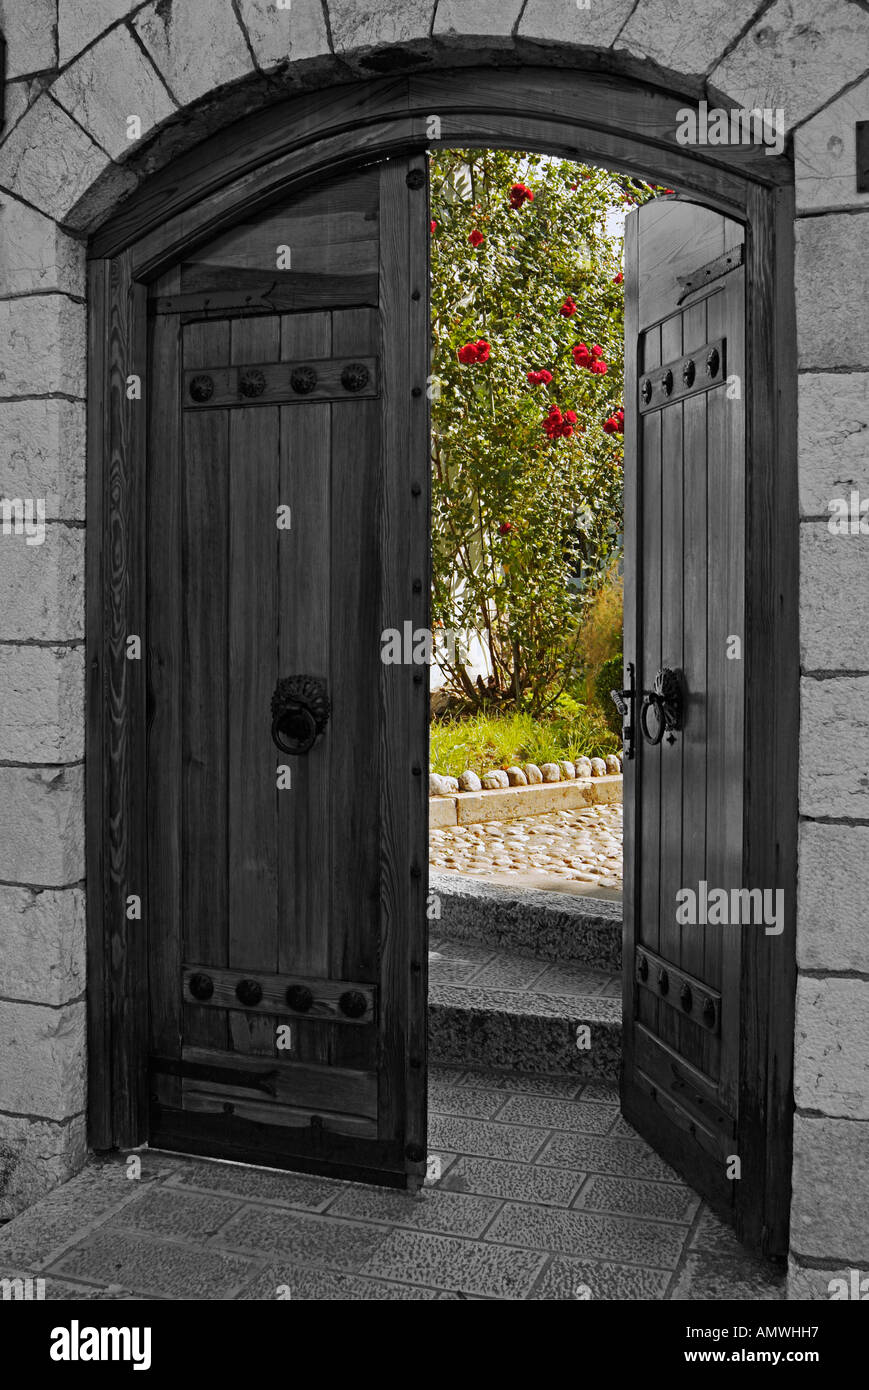 Gateway Into a Garden with Red Roses Growing Up a Wall Stock Photo